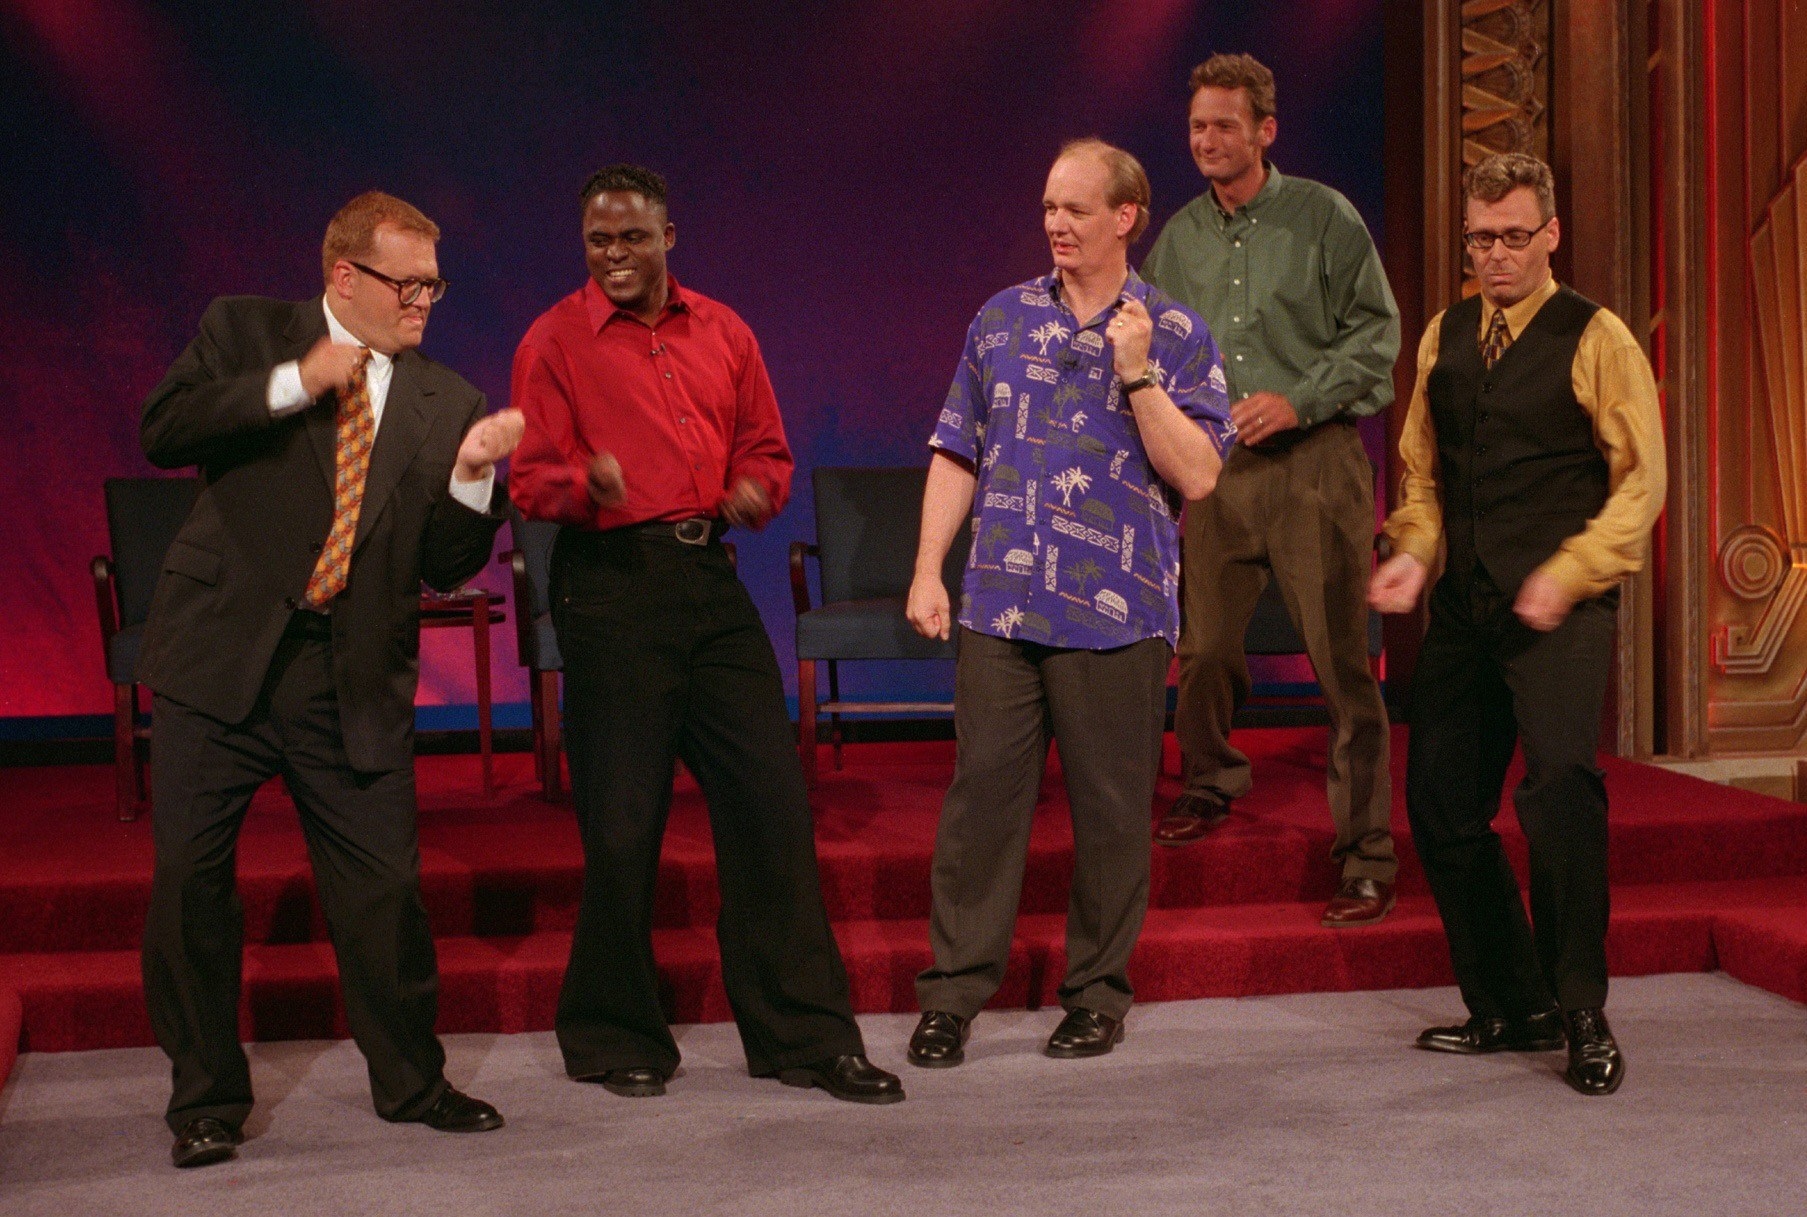 the cast of &quot;Whose Line Is It Anyway?&quot;